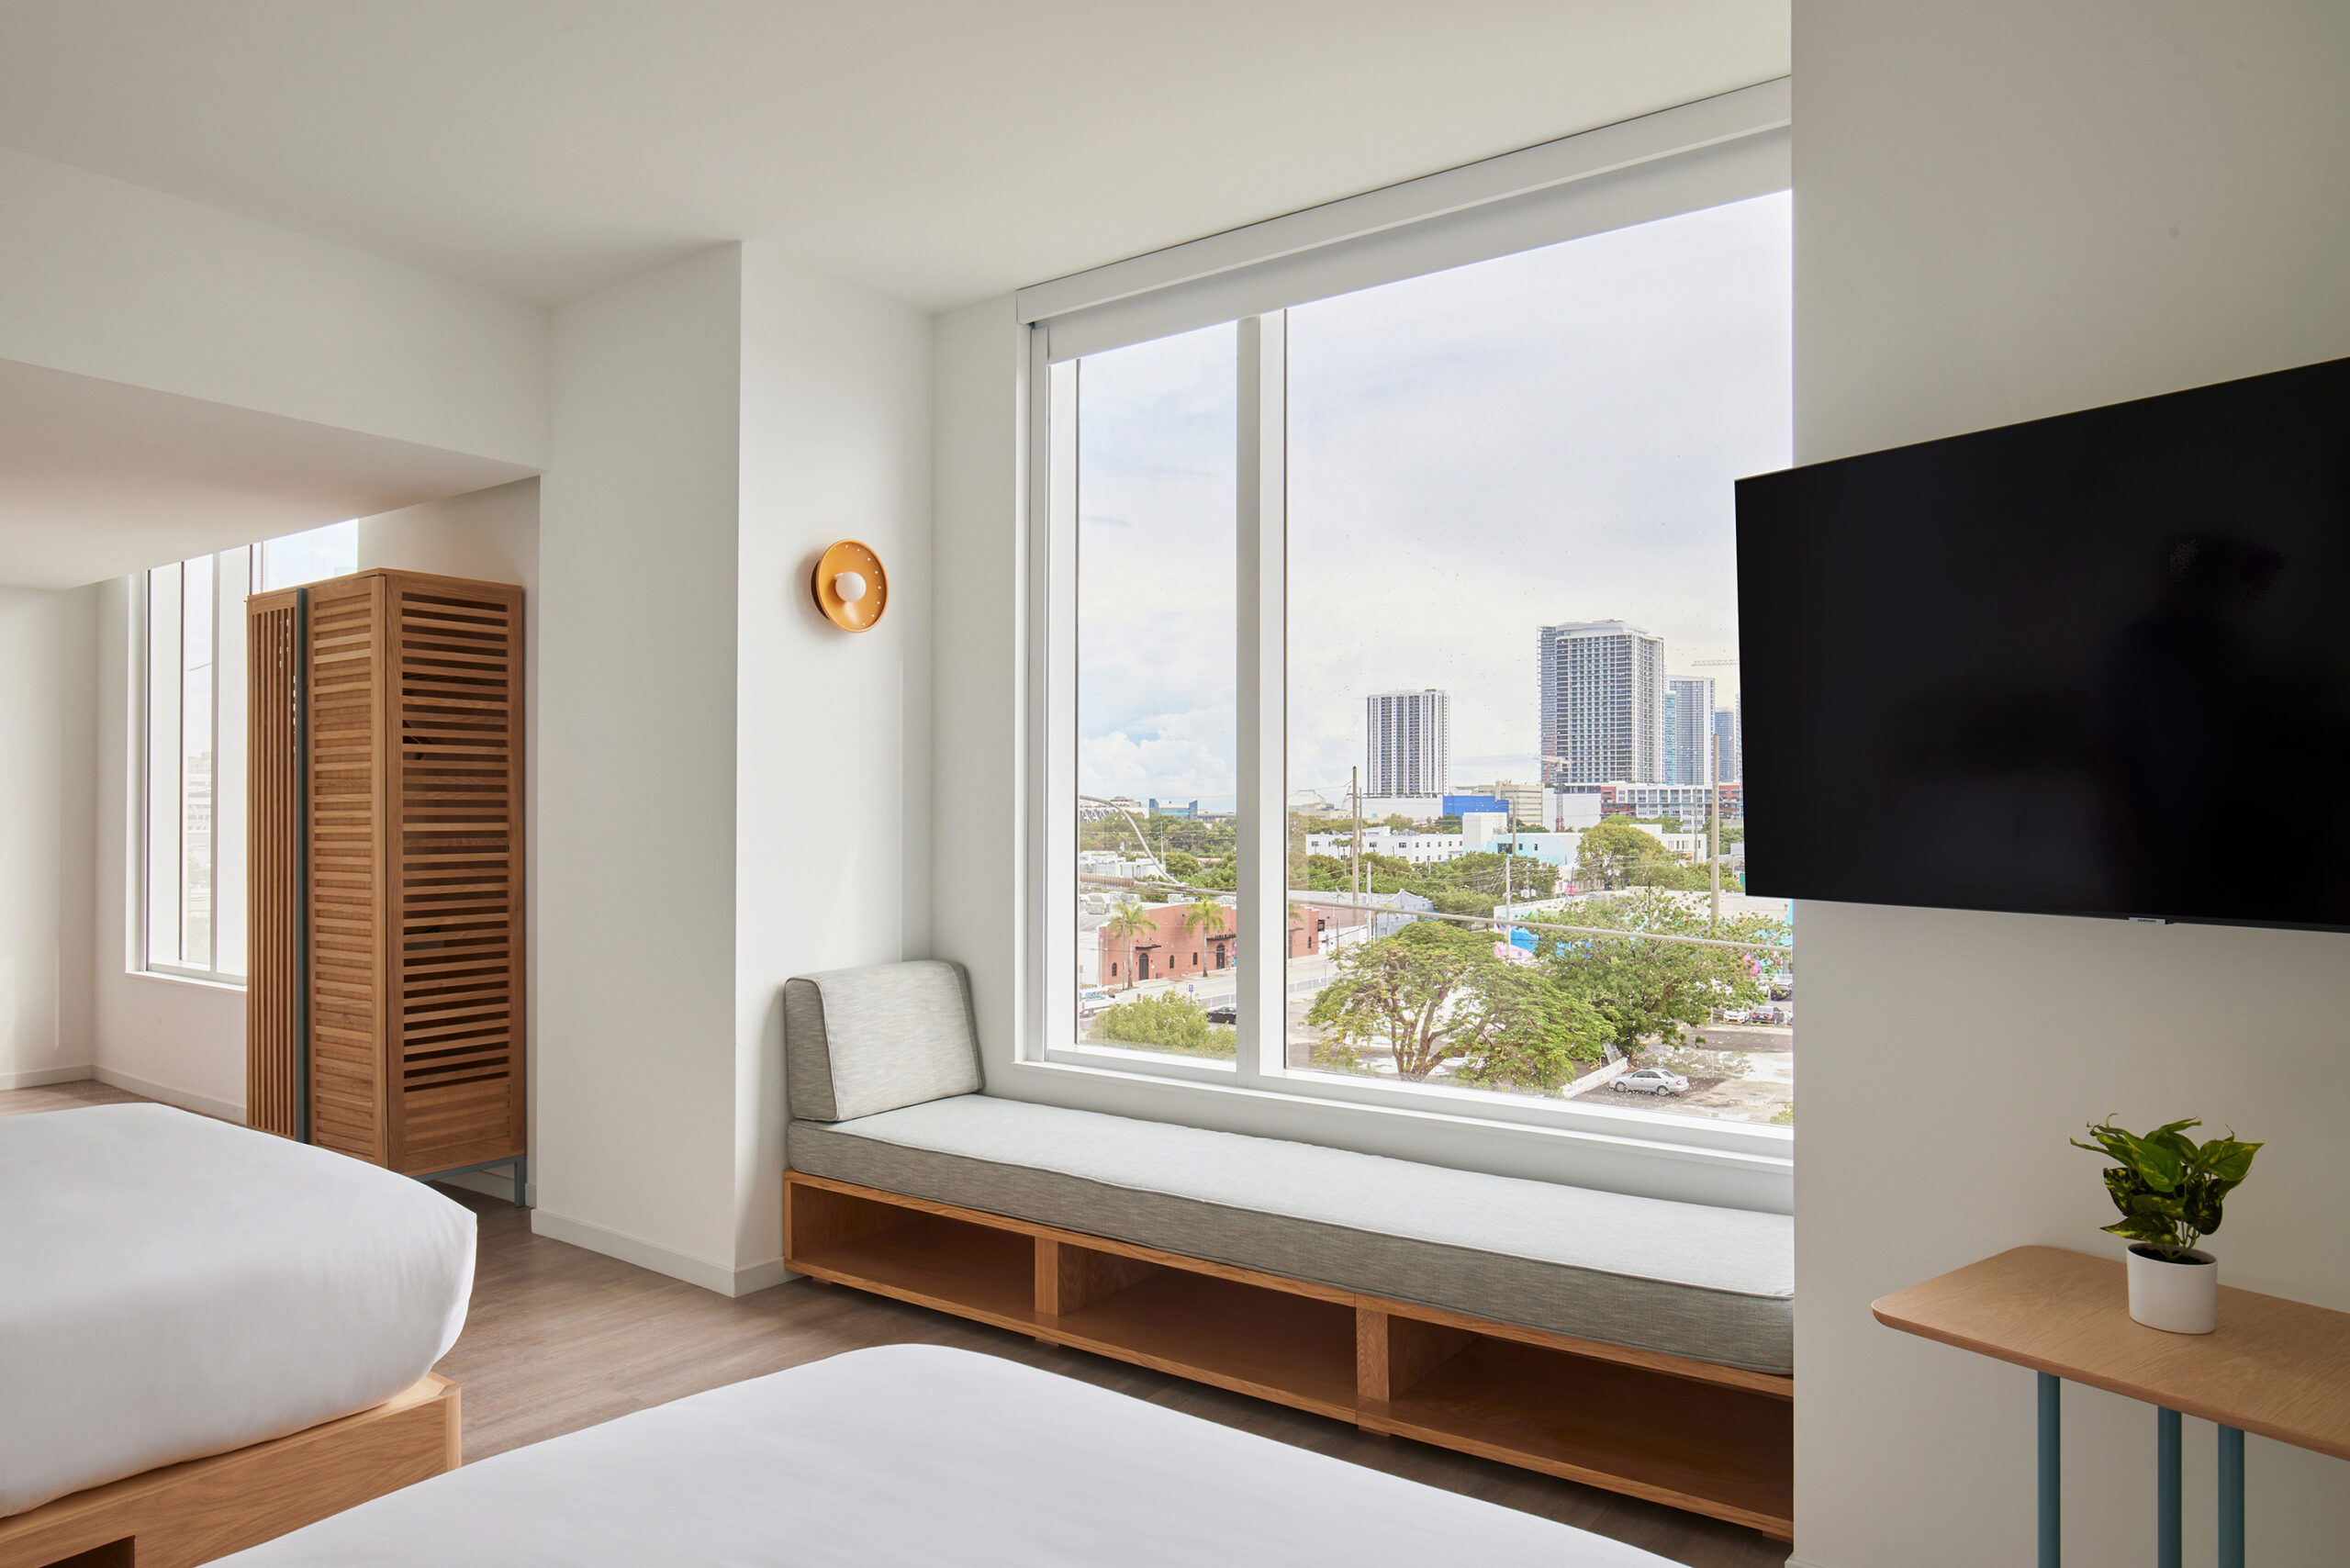 Arlo Wynwood Corner Two Double hotel room window seating and television